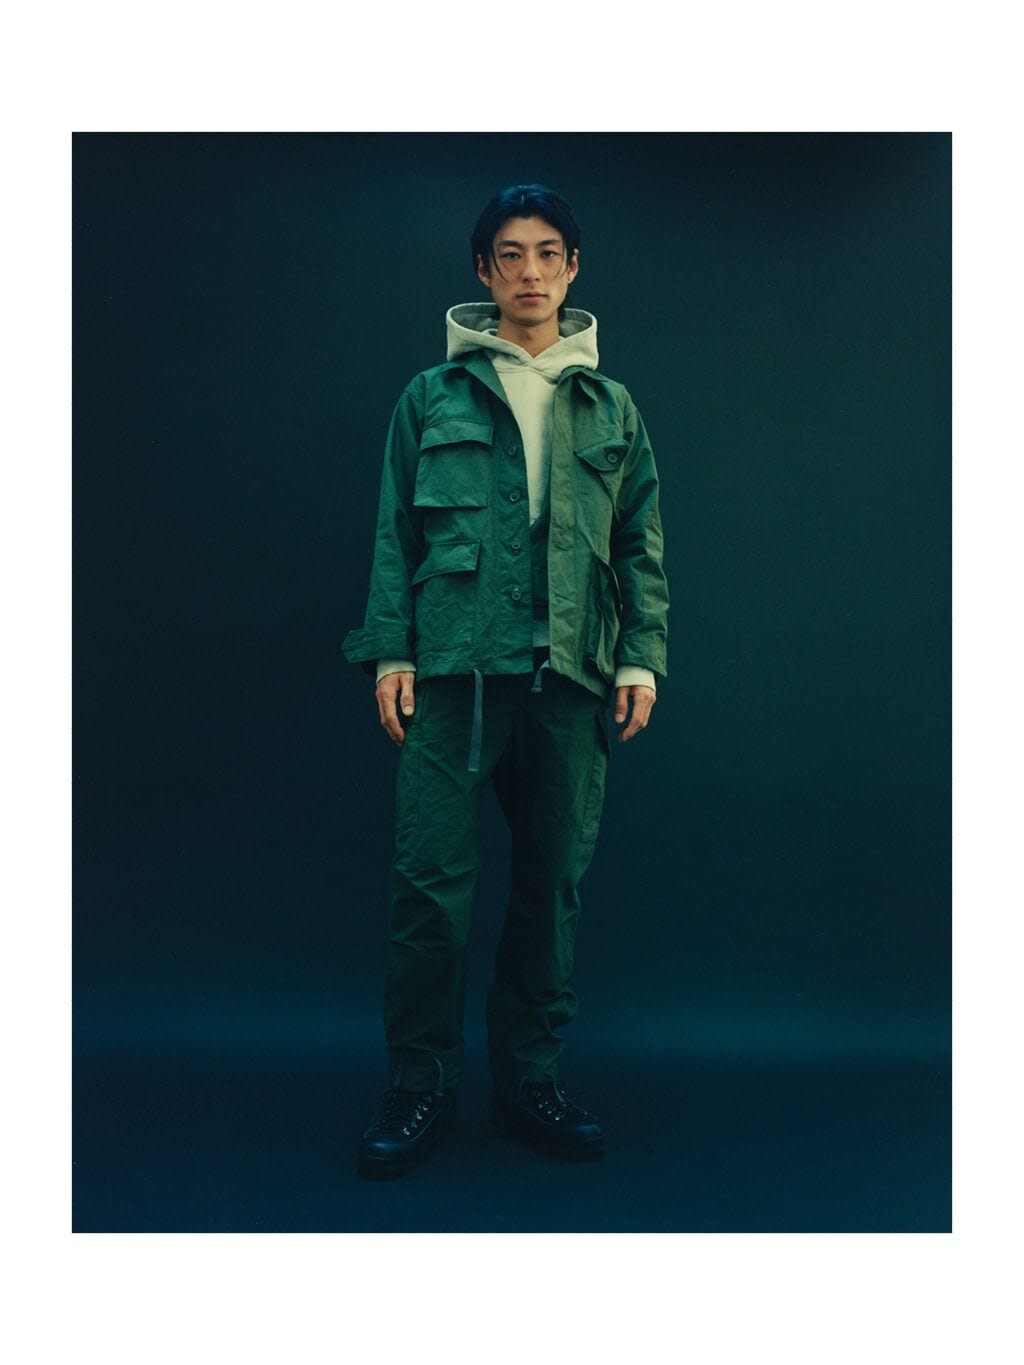 HAVEN and Engineered Garments Join Forces for Their 'CASCADIA 